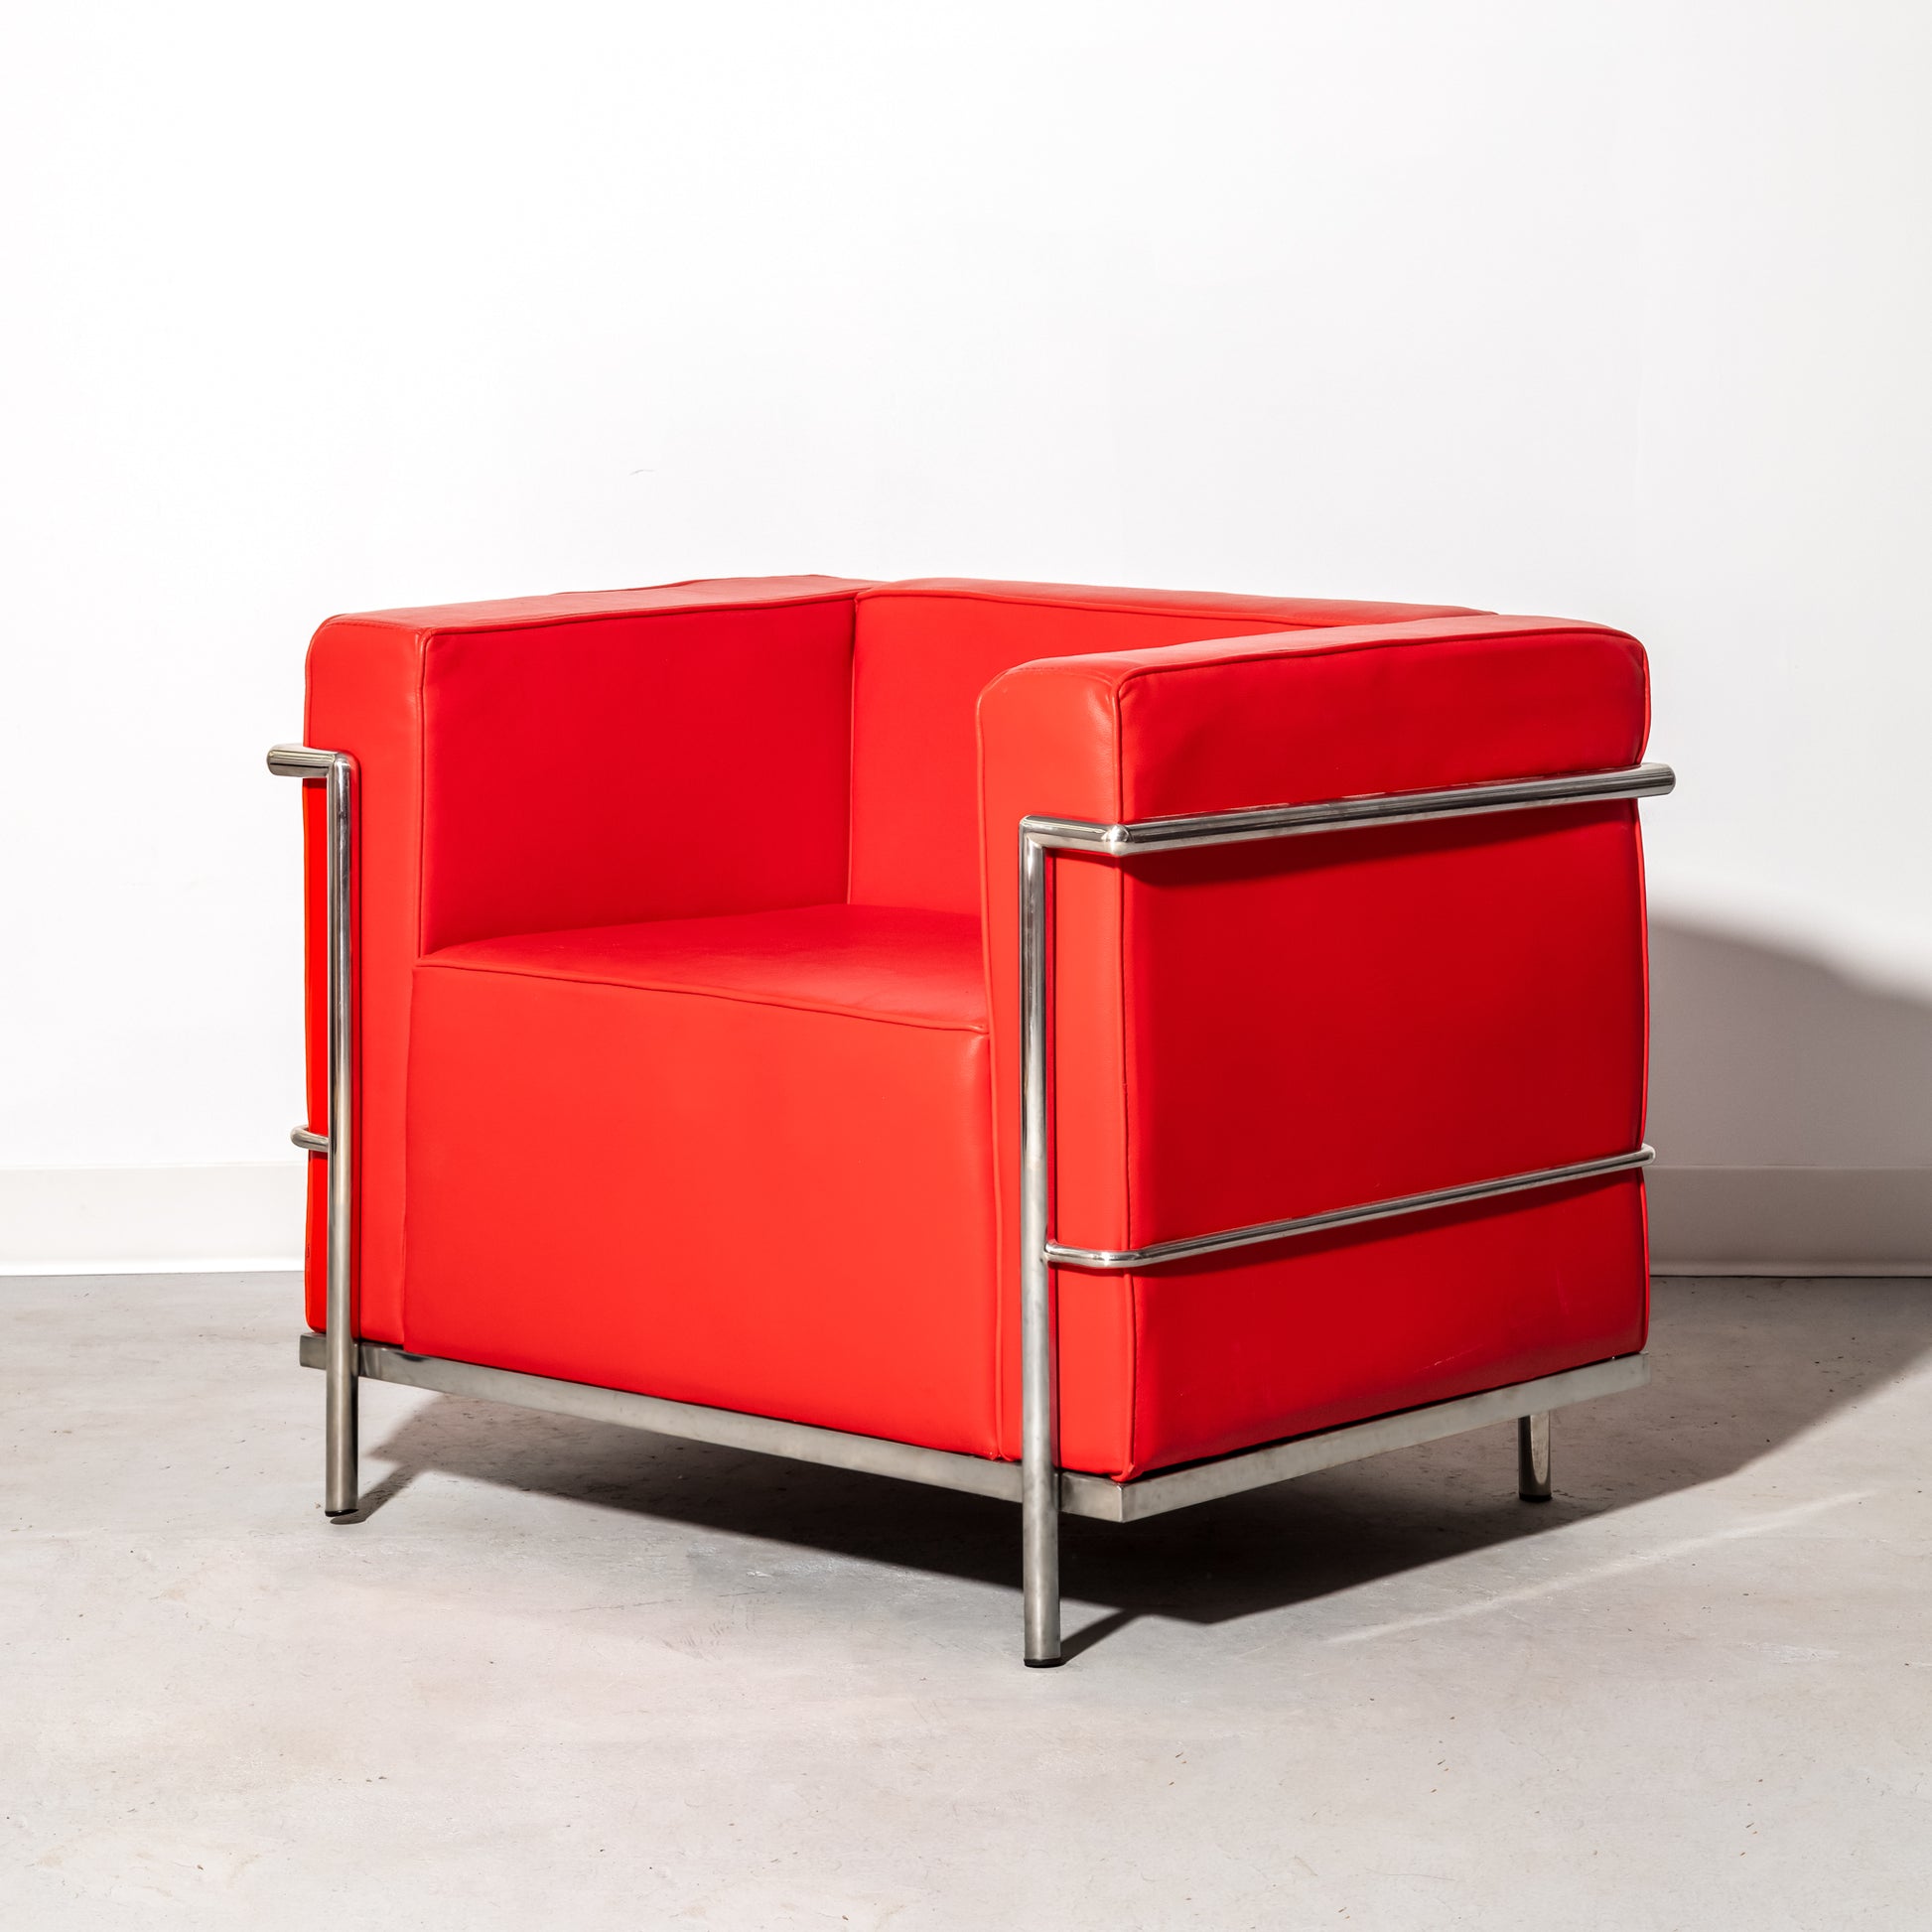 Red Le Corbusier style armchair